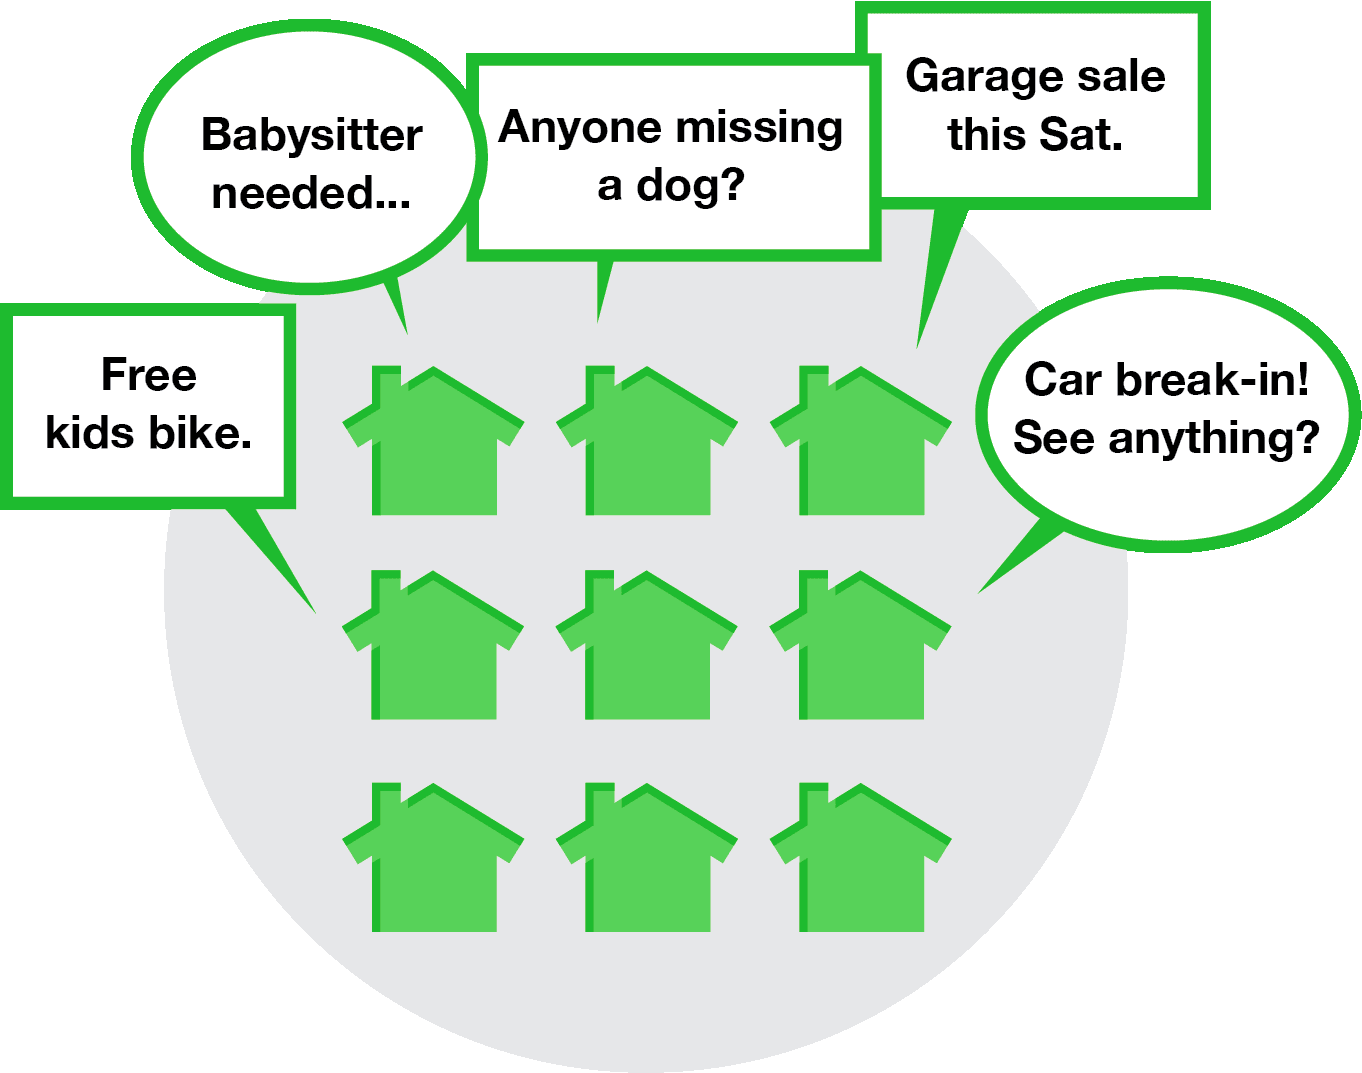 We offer a referral fee at Nextdoor from SavvyCleaner.com